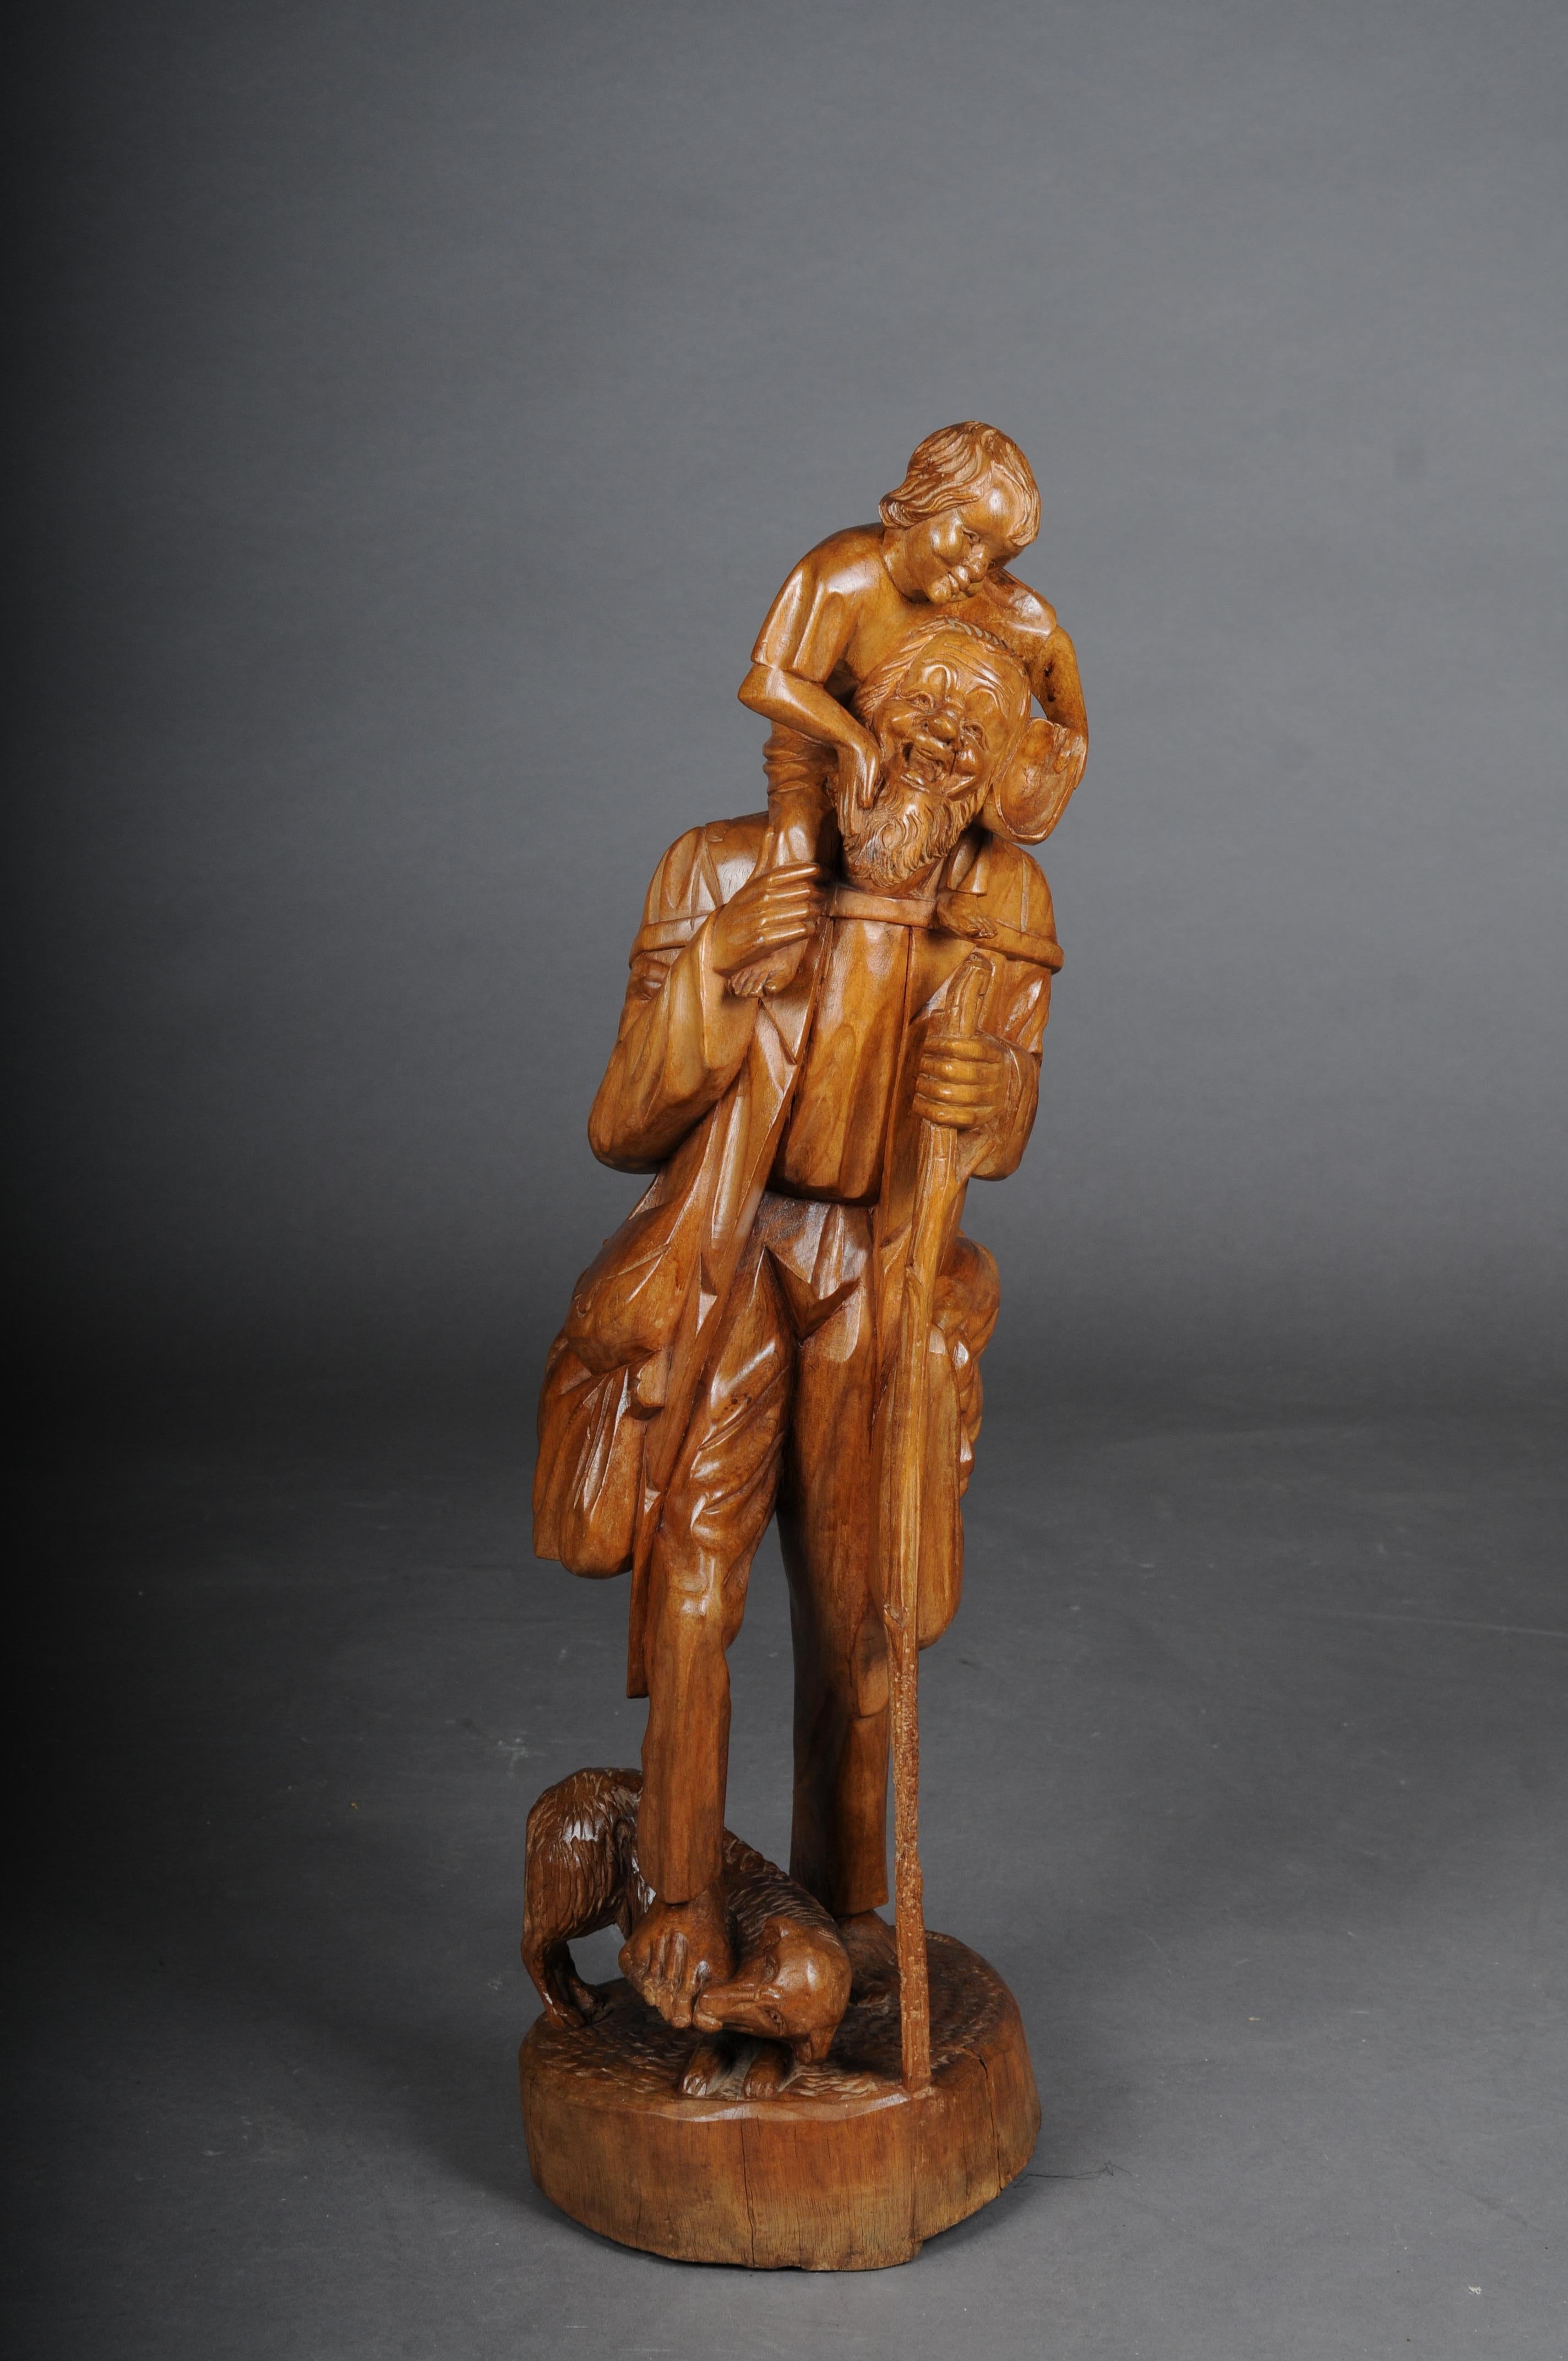 20th Century wooden sculpture as a ranger with child made of lime tree, southern German 20th century.

Solid lime wood. Finely carved figure depicting an old ranger with a child on his shoulders and a dog
Southern Germany/Tyrol 20th century